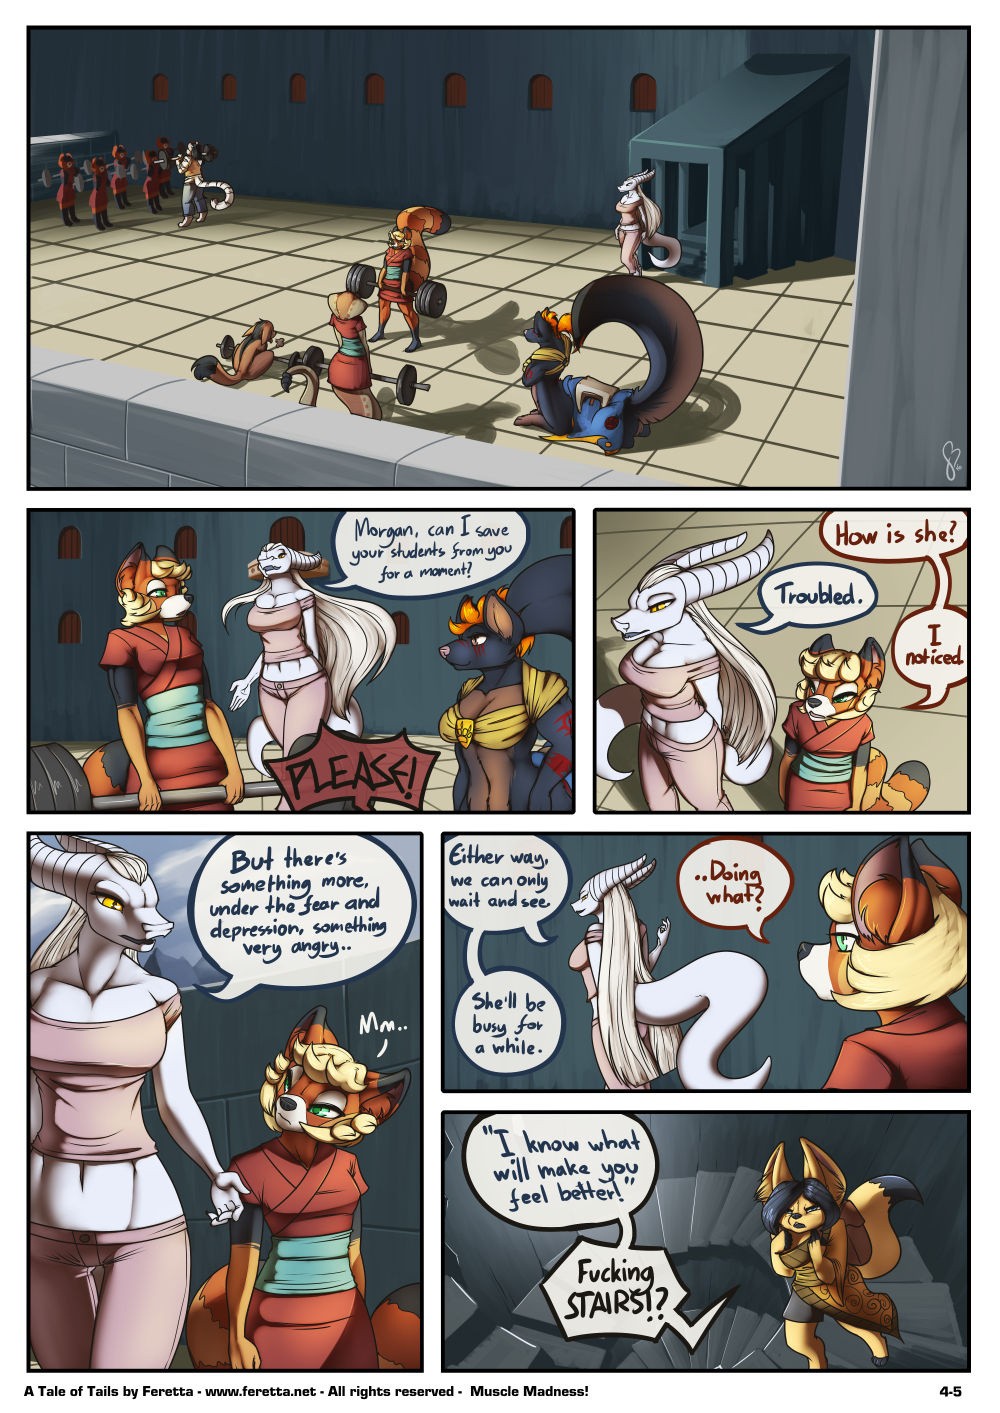 A Tale of Tails 4 - Matters of the mind porn comic picture 5